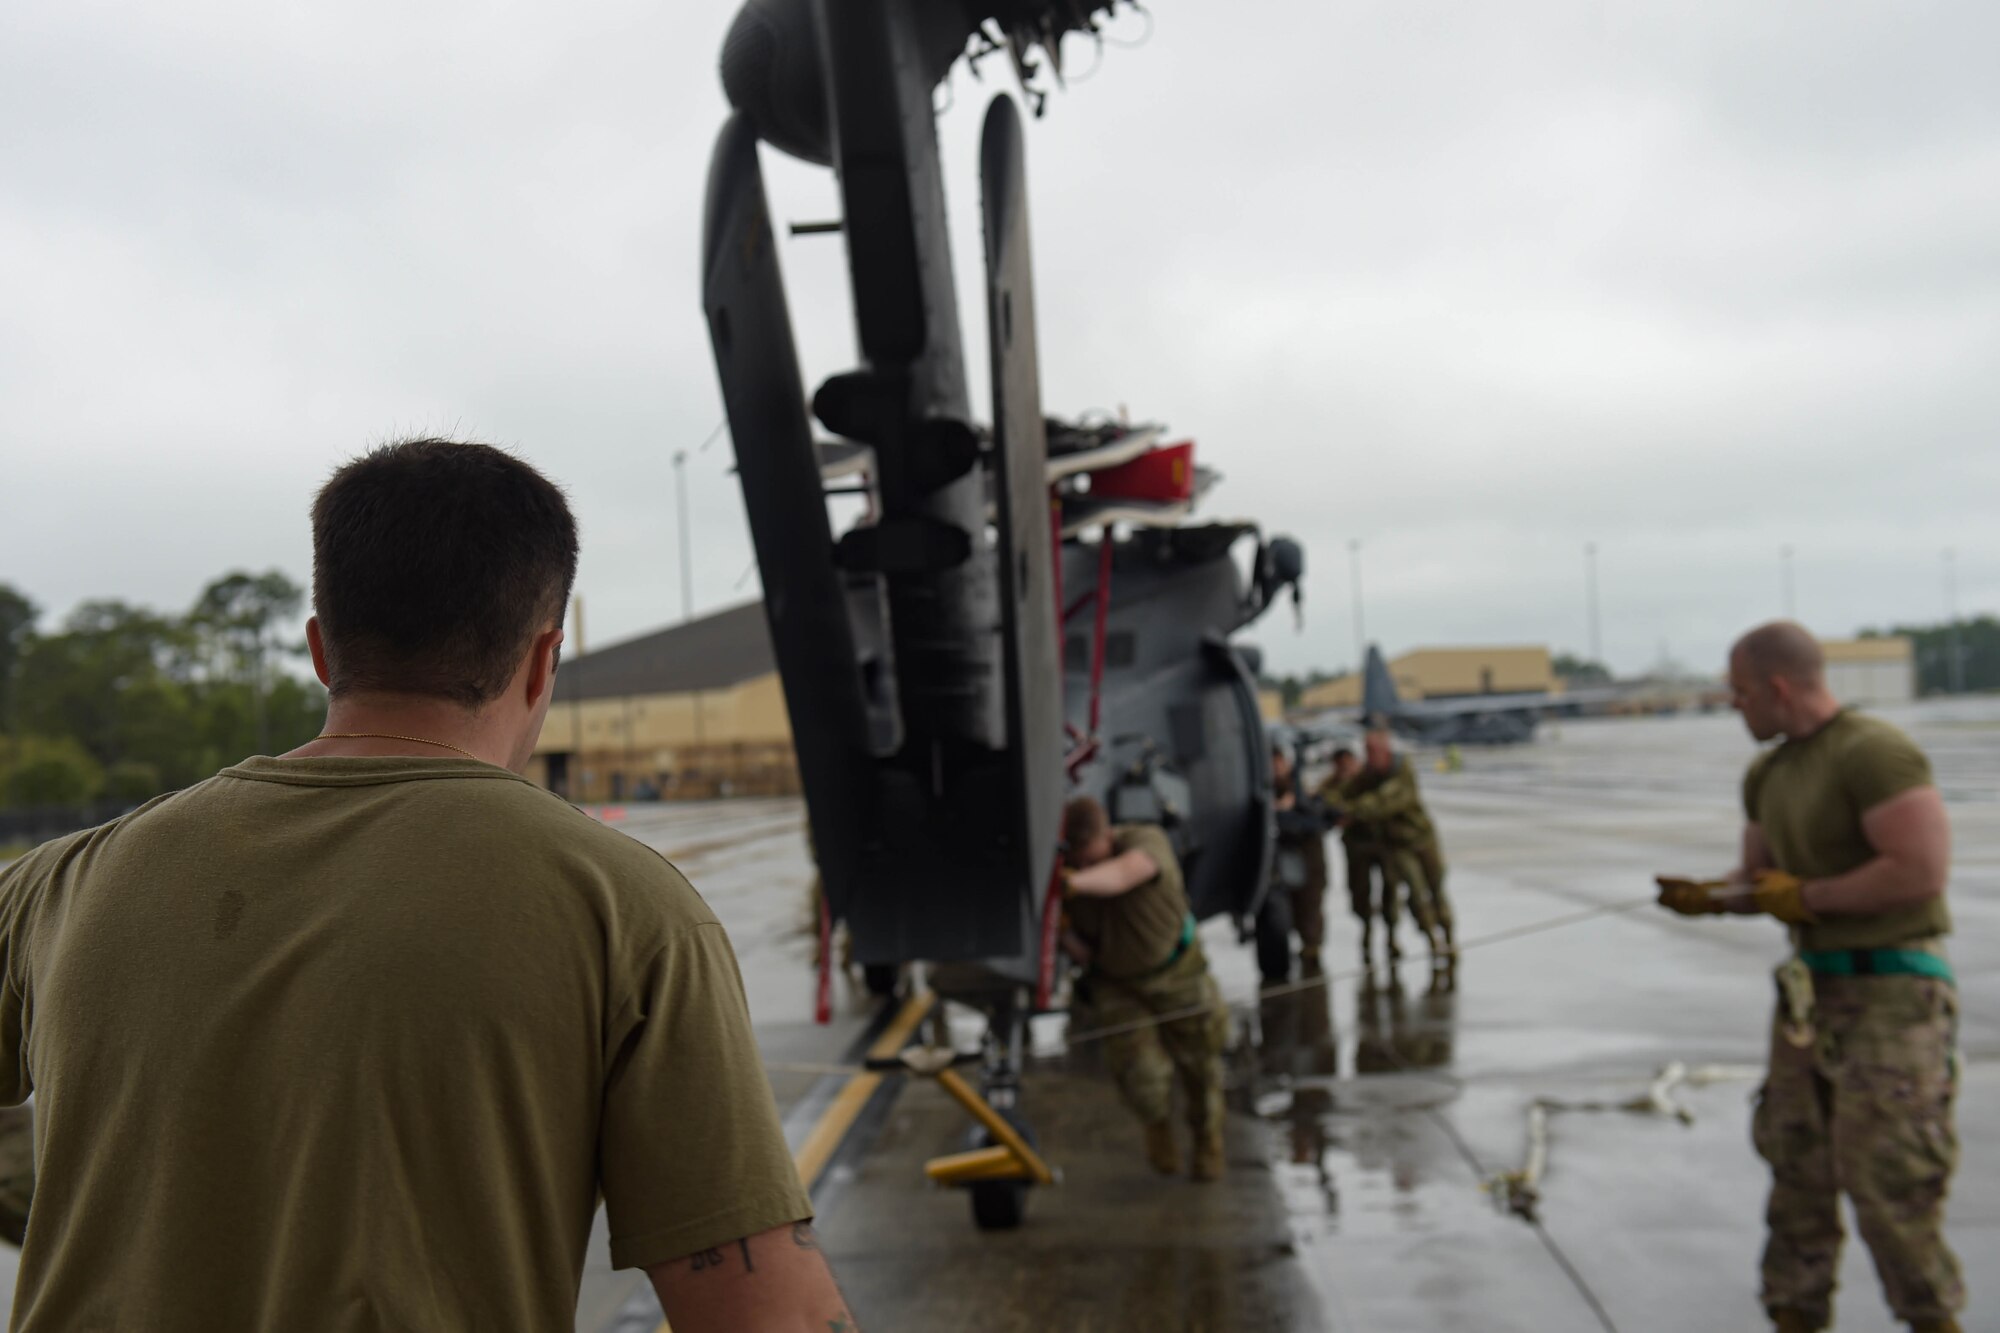 A photo of Airmen pushing a helicopter.